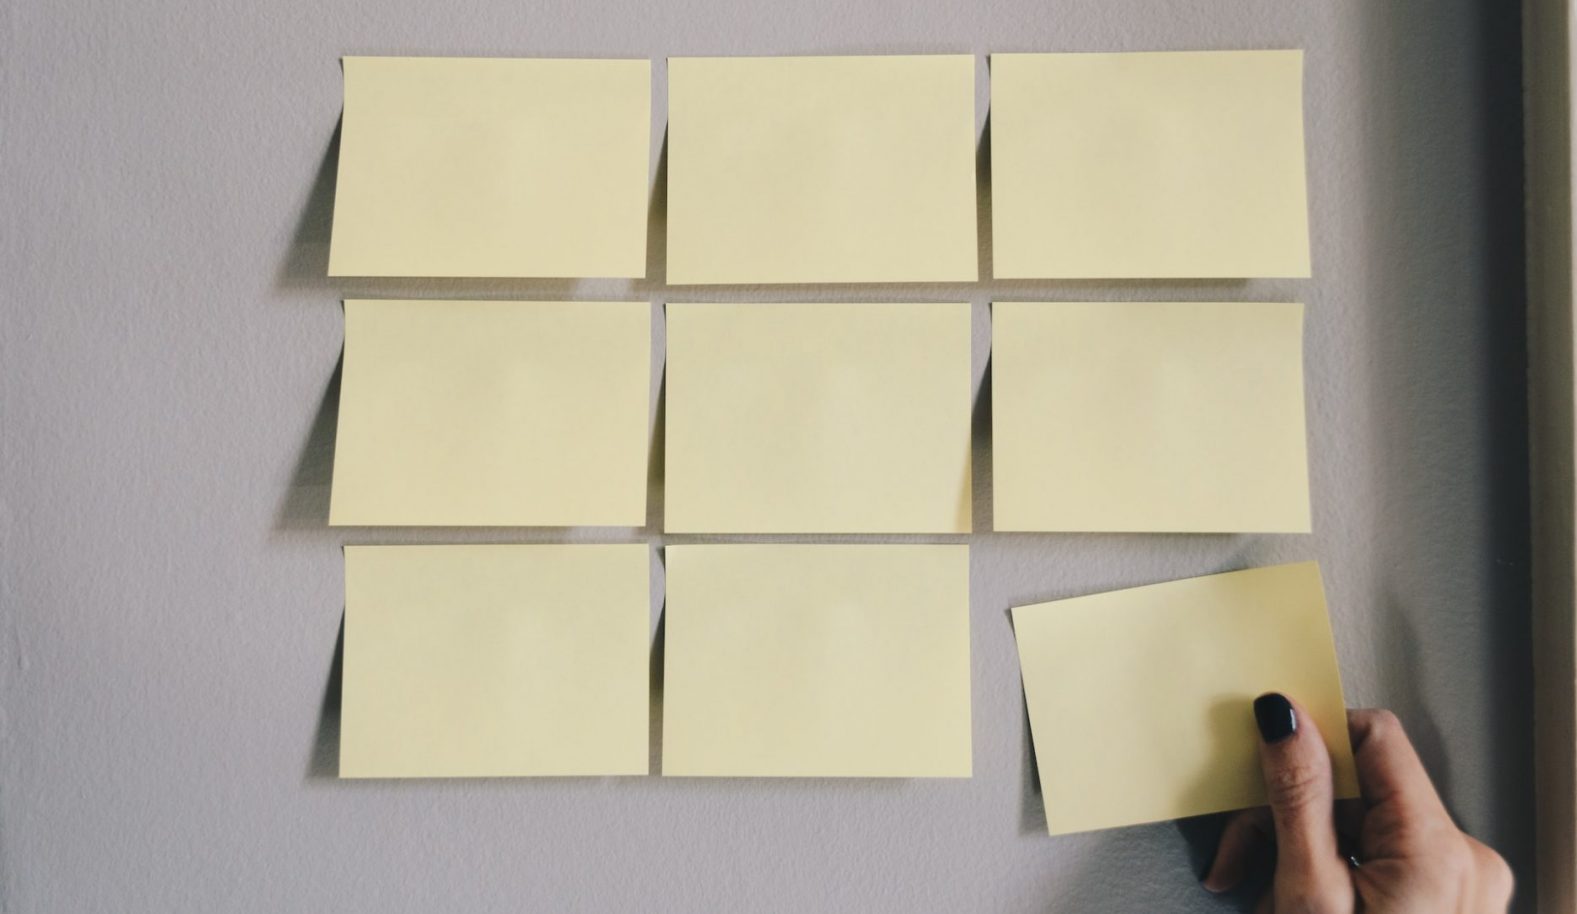 Blank post-it notes arranged in a rectangle